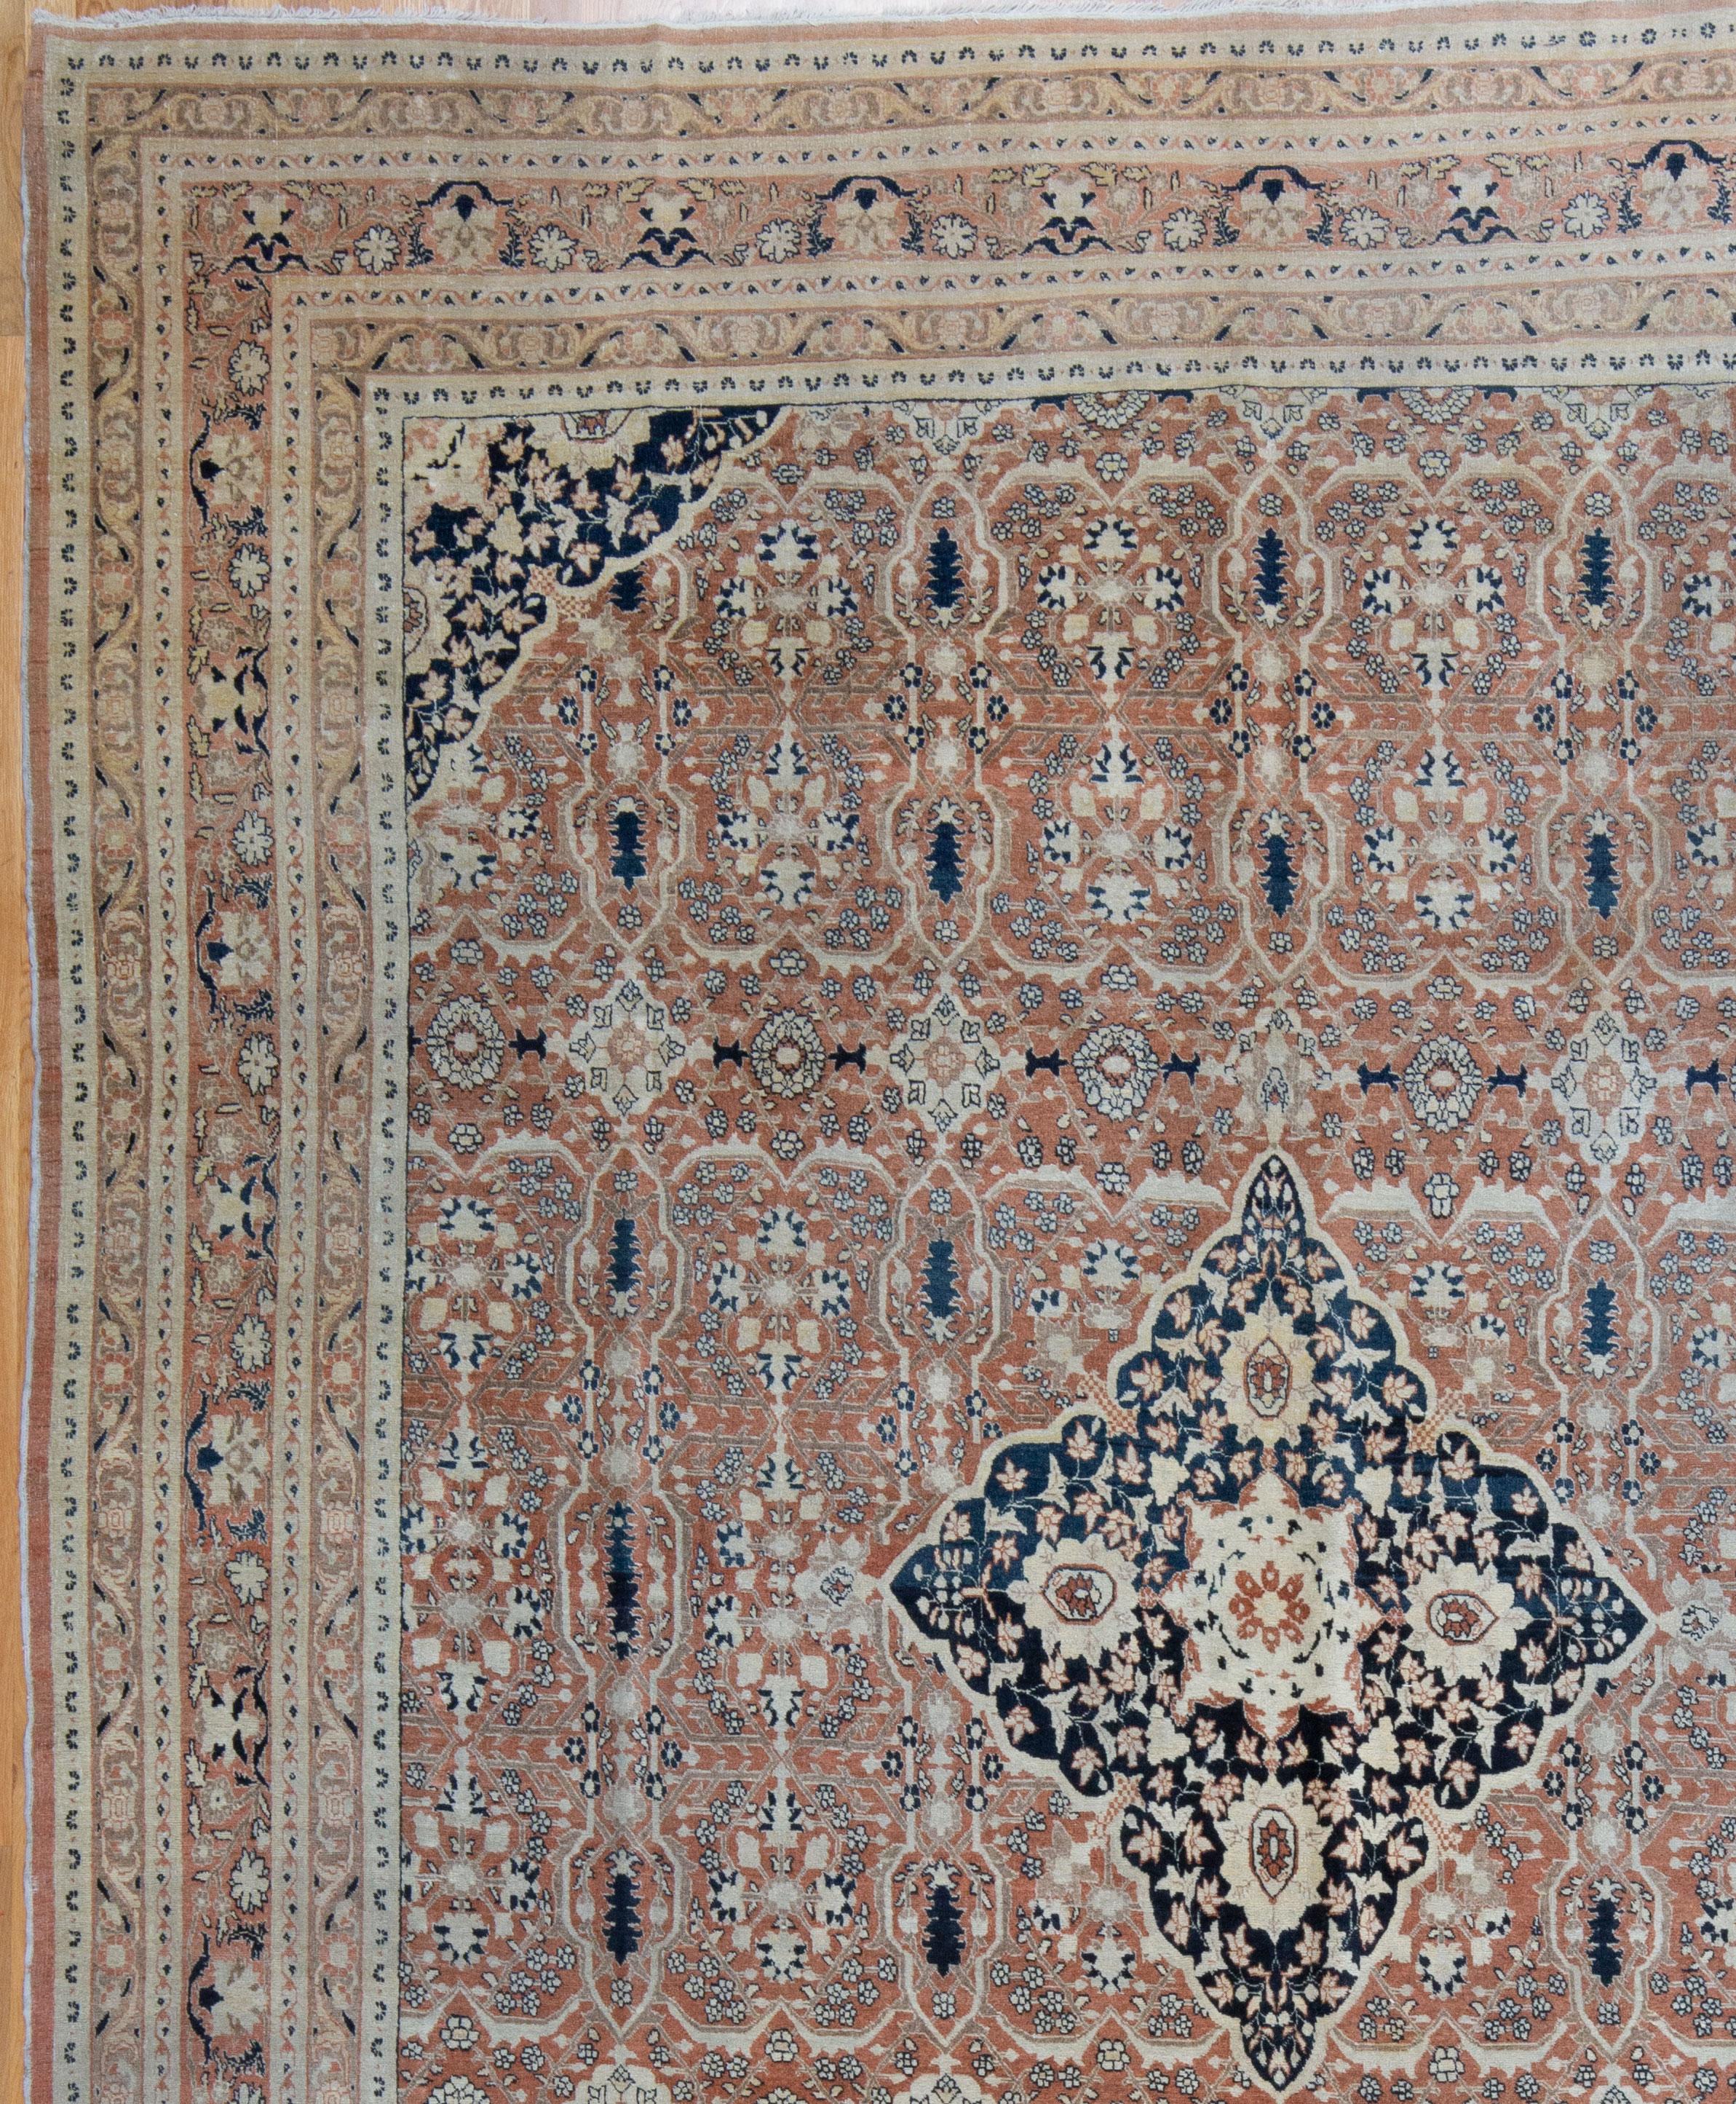 A high quality Tabriz with a fine weave and sophisticated design. Meandering flowers and vines on a blush pink field. Naturally dyed from the last quarter of the 19th Century. In beautiful condition with a low wool pile and preserved sides and ends.